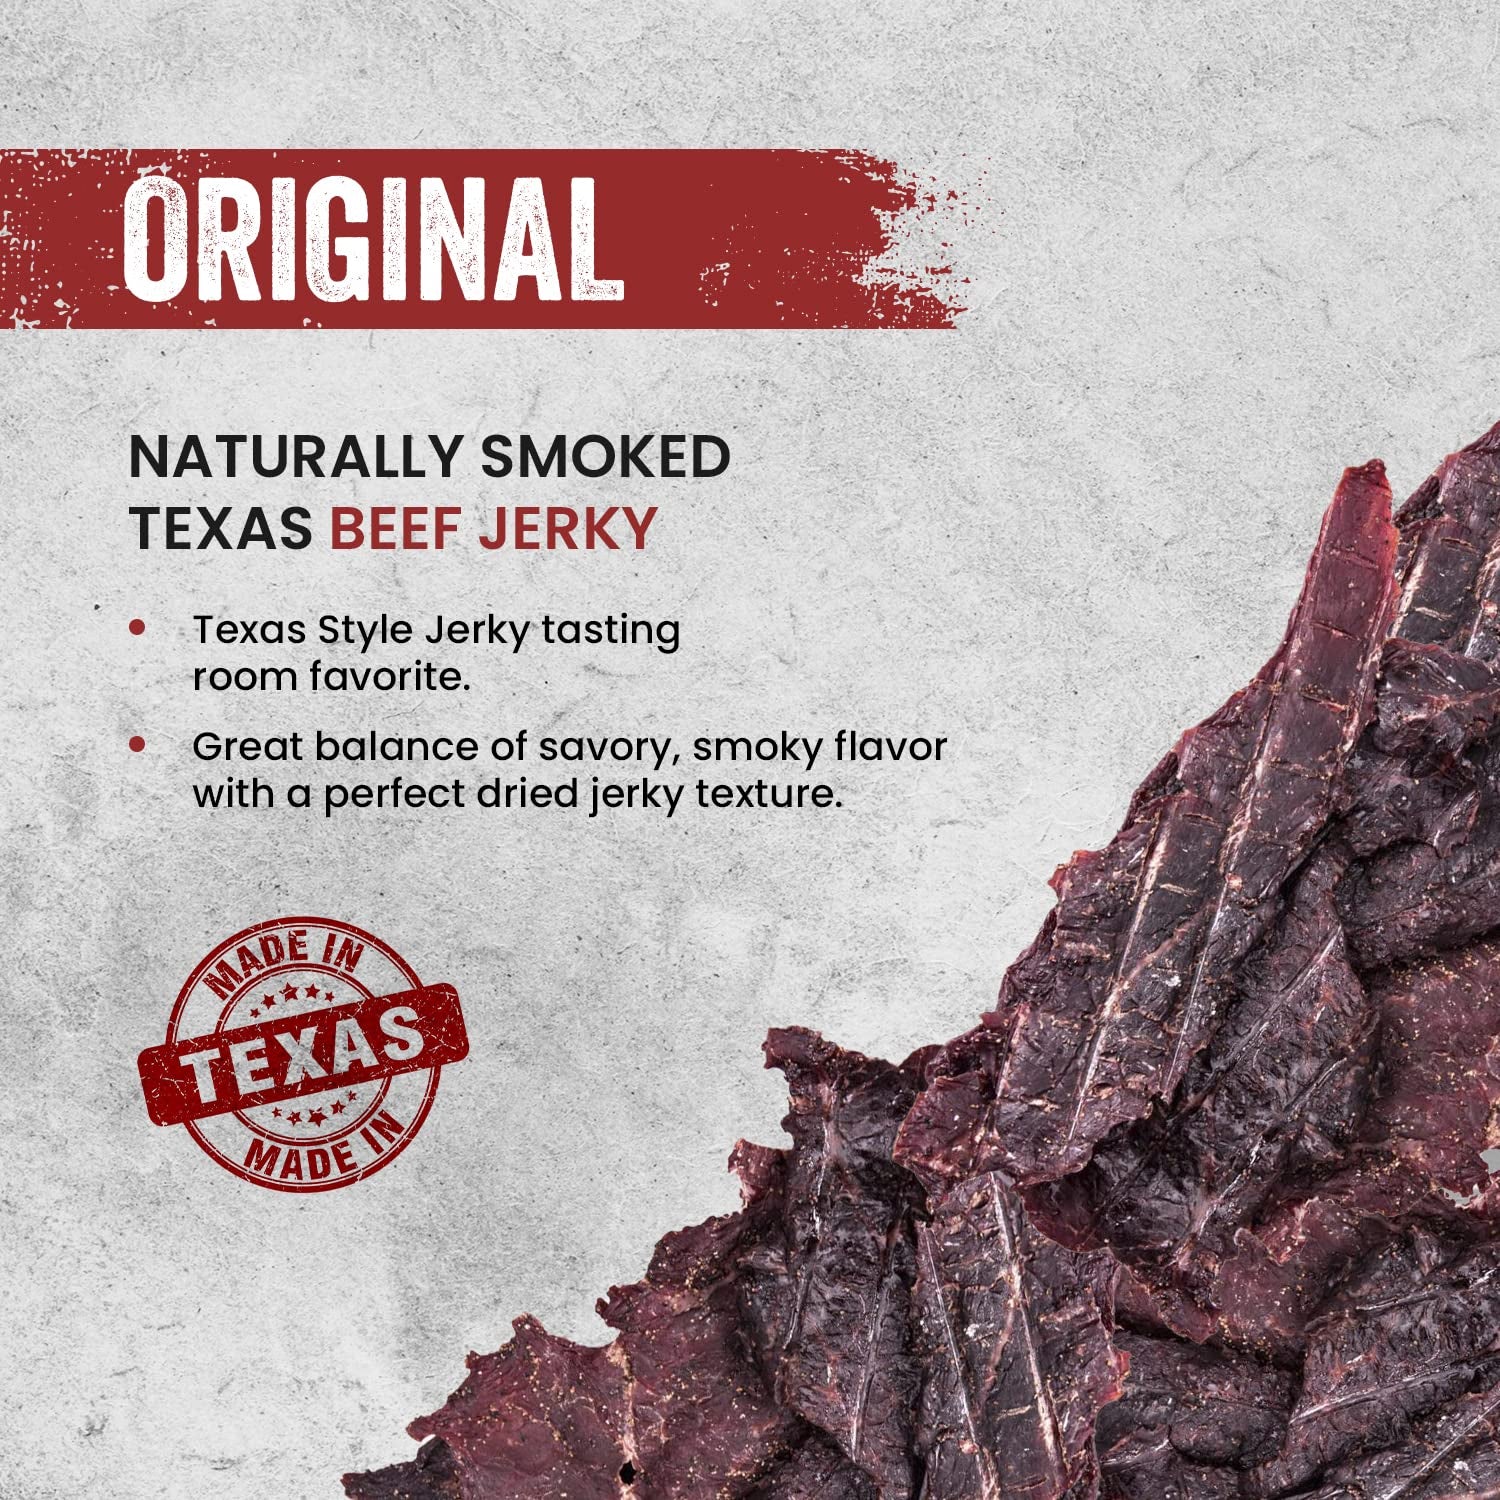 Texas Style Beef Jerky Bulk, Healthy Beef Jerky Snack Packs, Low Carb with 18 Grams of Protein, Gluten & MSG Free, Original Flavor, 1 Pound (Pack of 3)